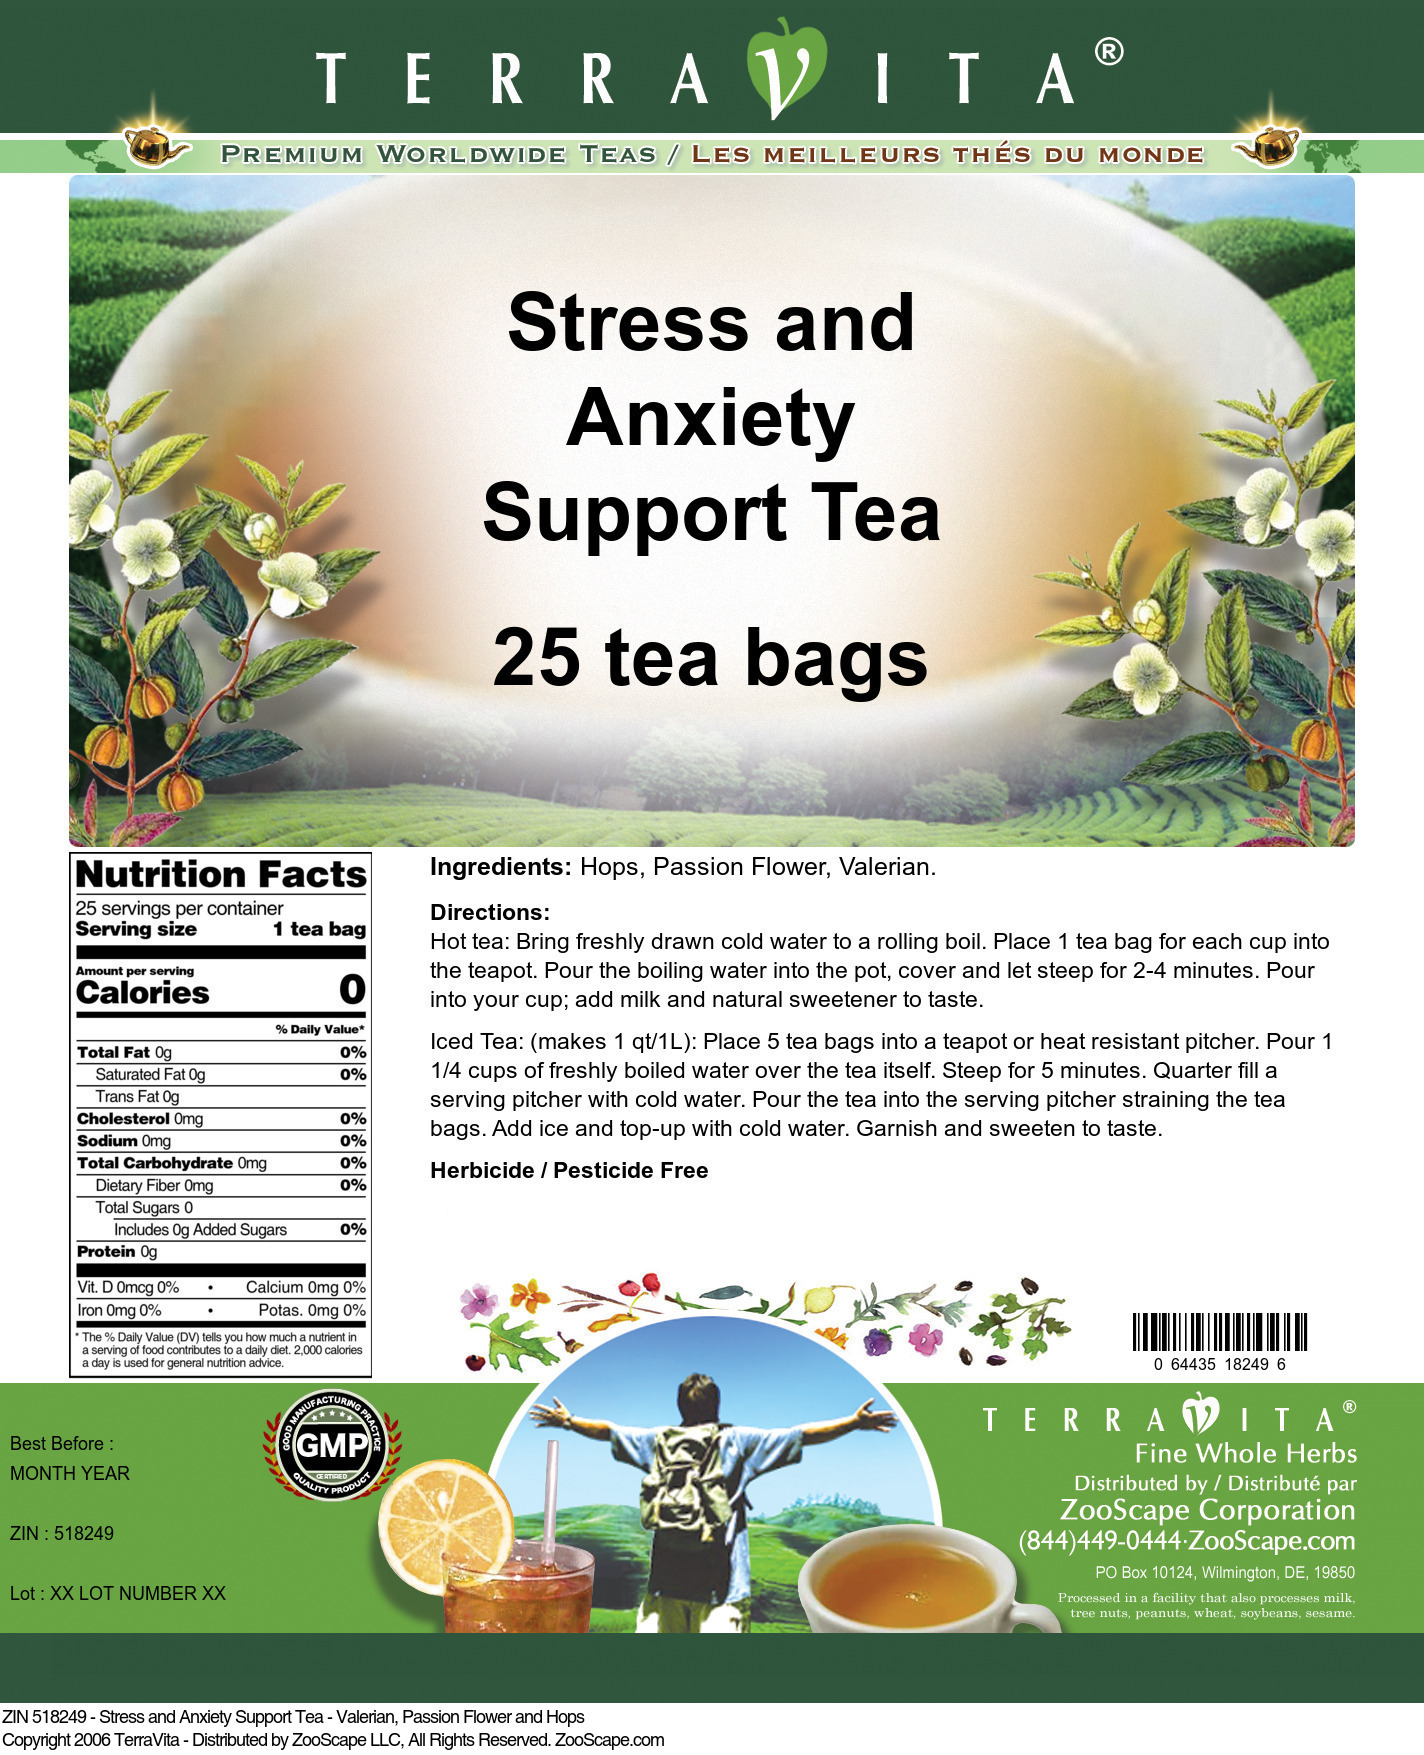 Stress and Anxiety Support Tea - Valerian, Passion Flower and Hops - Label